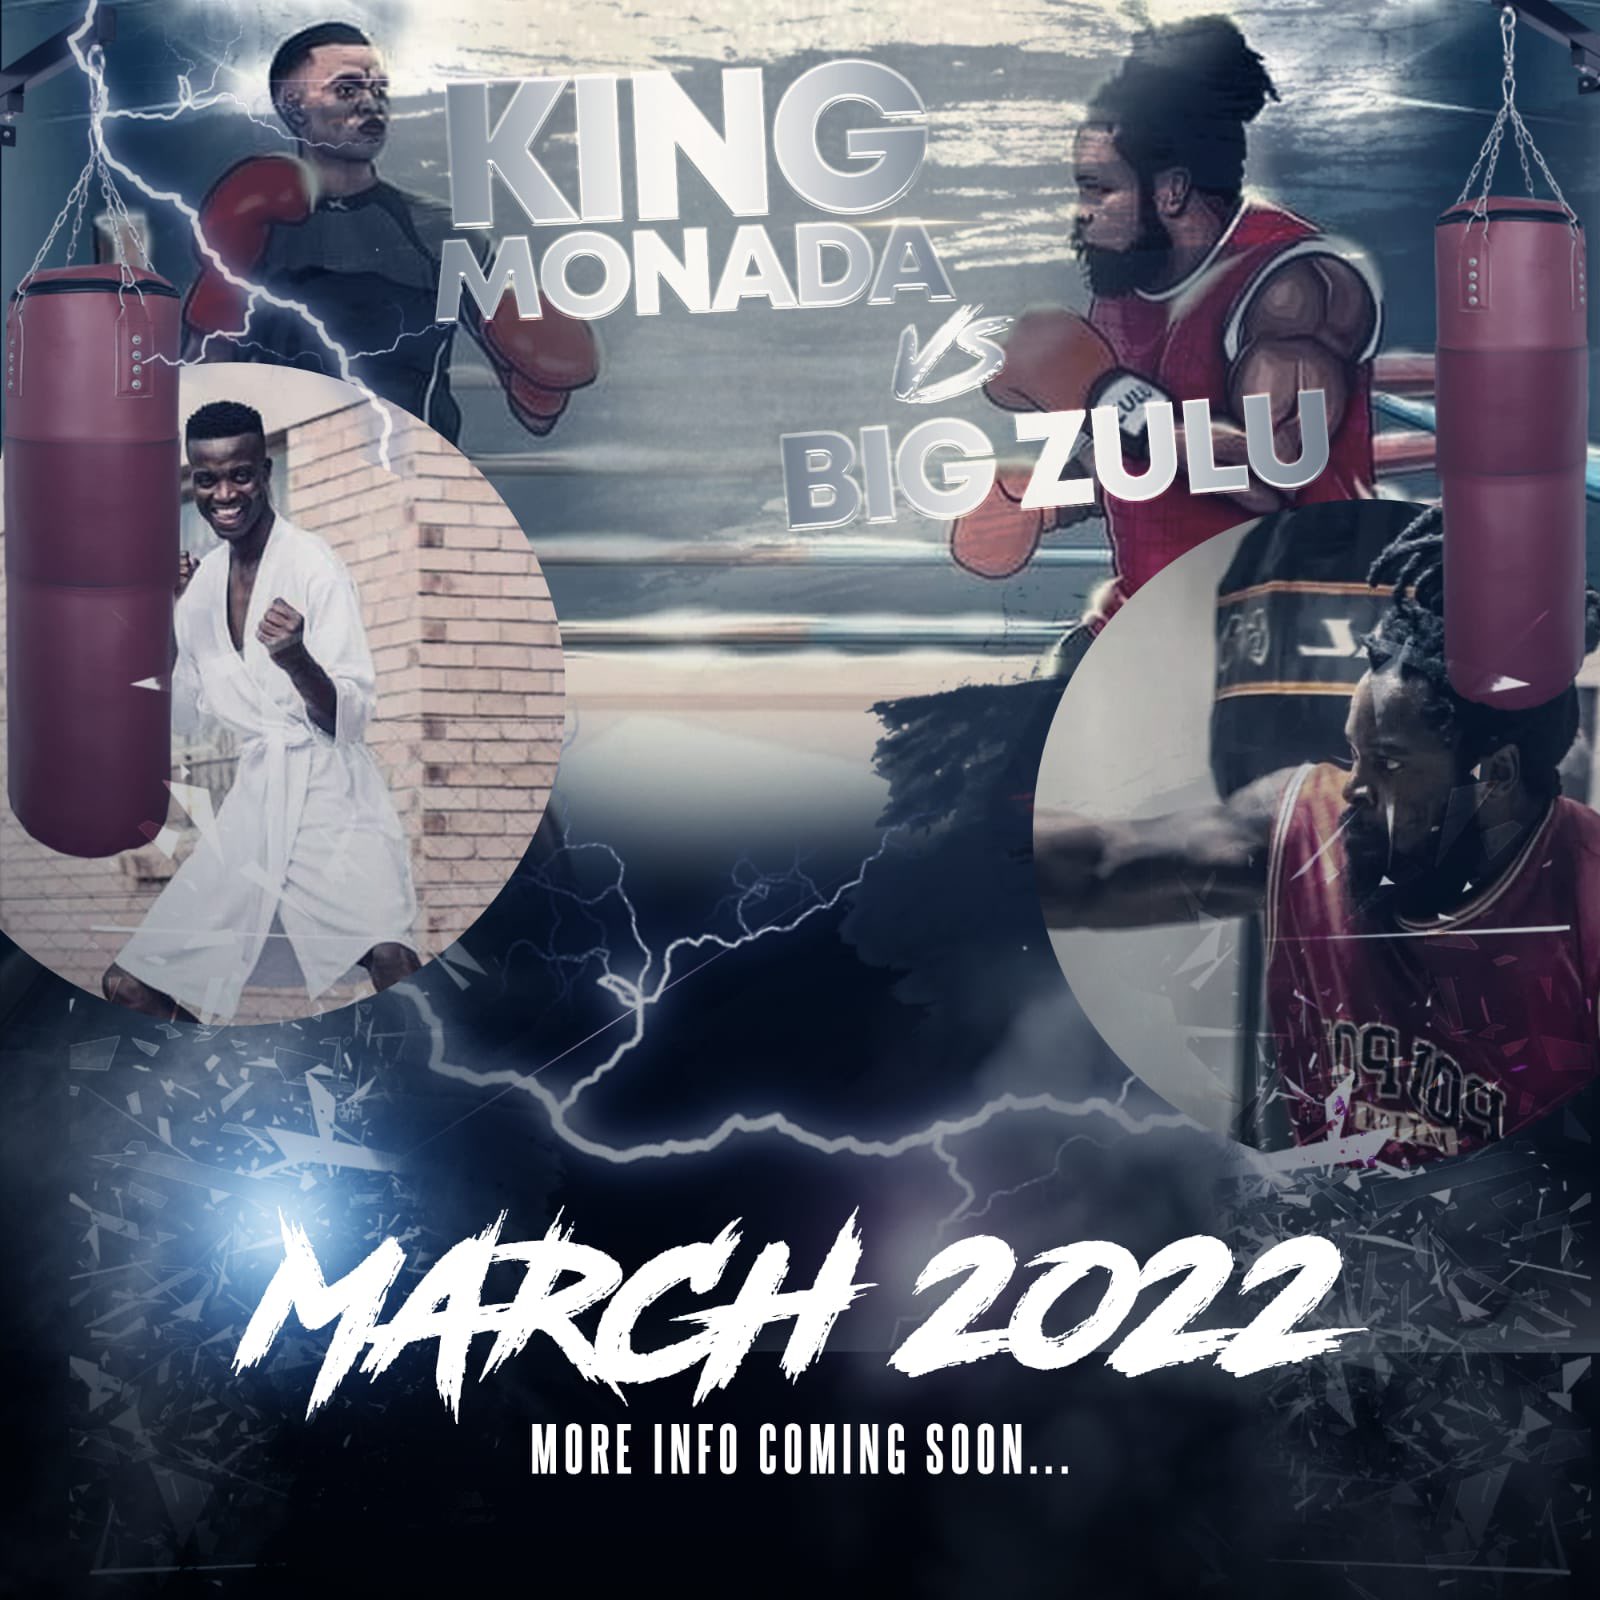 Get Funeral Cover First: King Monada Advised Over Boxing March Vs King Zulu